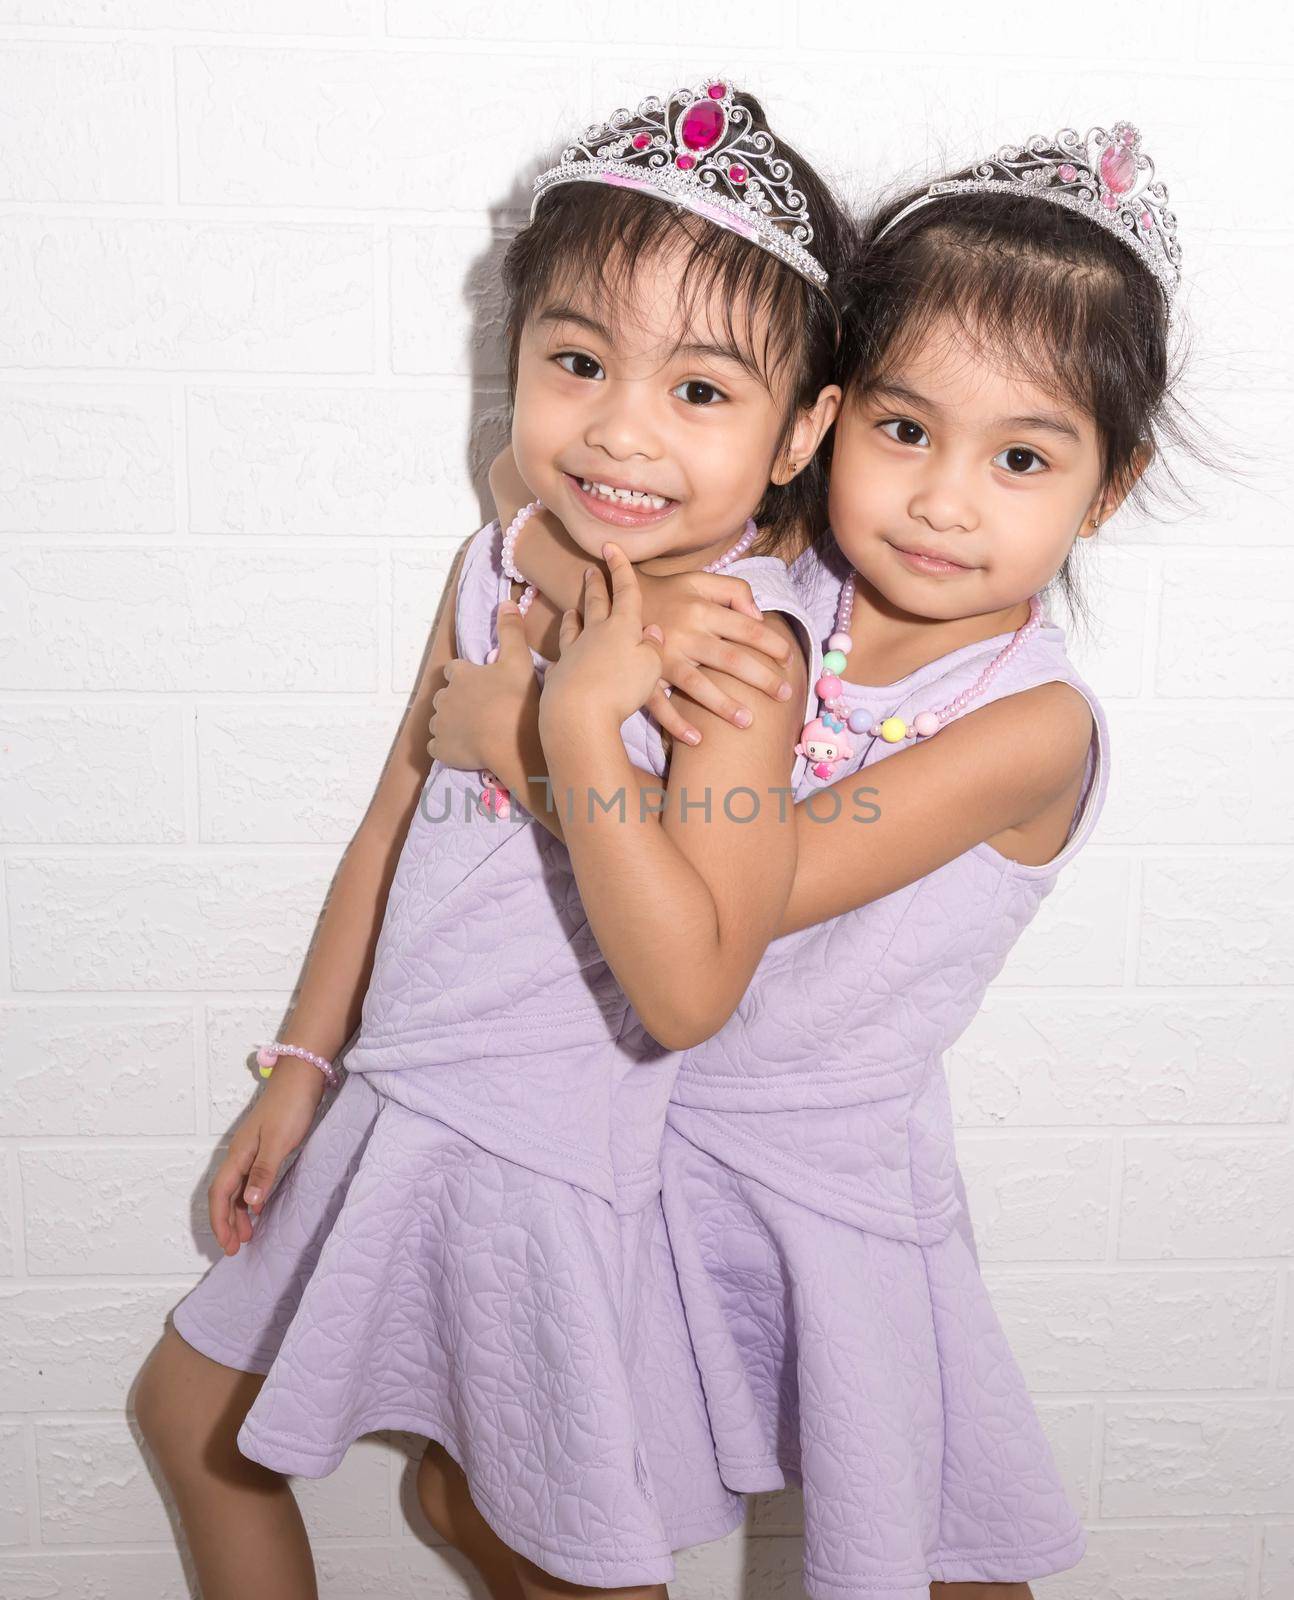 Female asian identical twins sitting on chair with white background. Wearing purple dress and accessories. Standing hugging each other and having fun